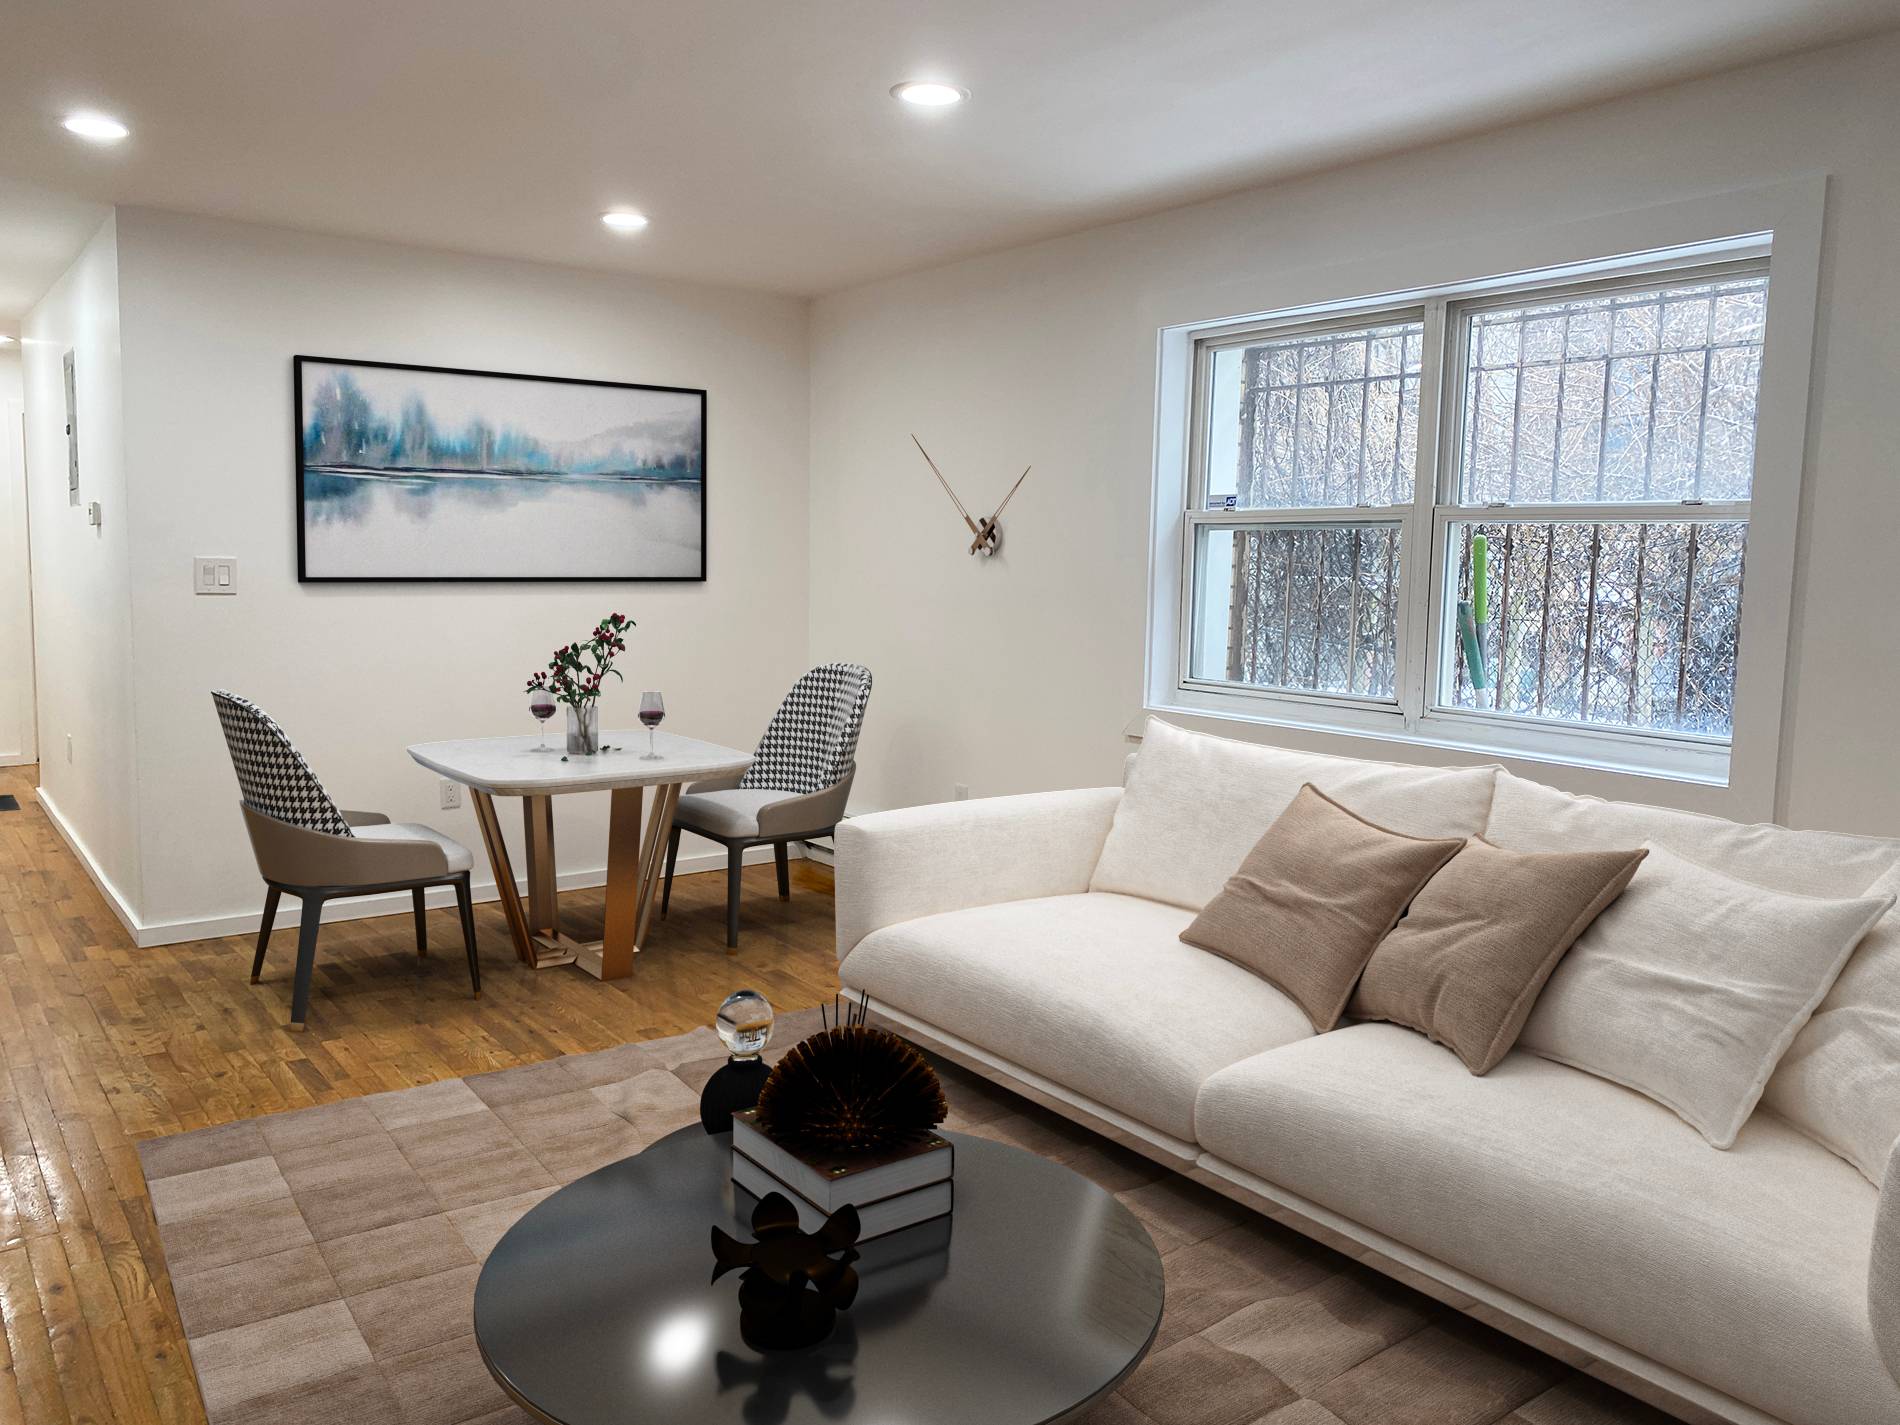 This newly renovated 3 bedroom, 2 bath apartment is situated in the heart of Bedford Stuyvesant in an owner occupied, peaceful, private residence.